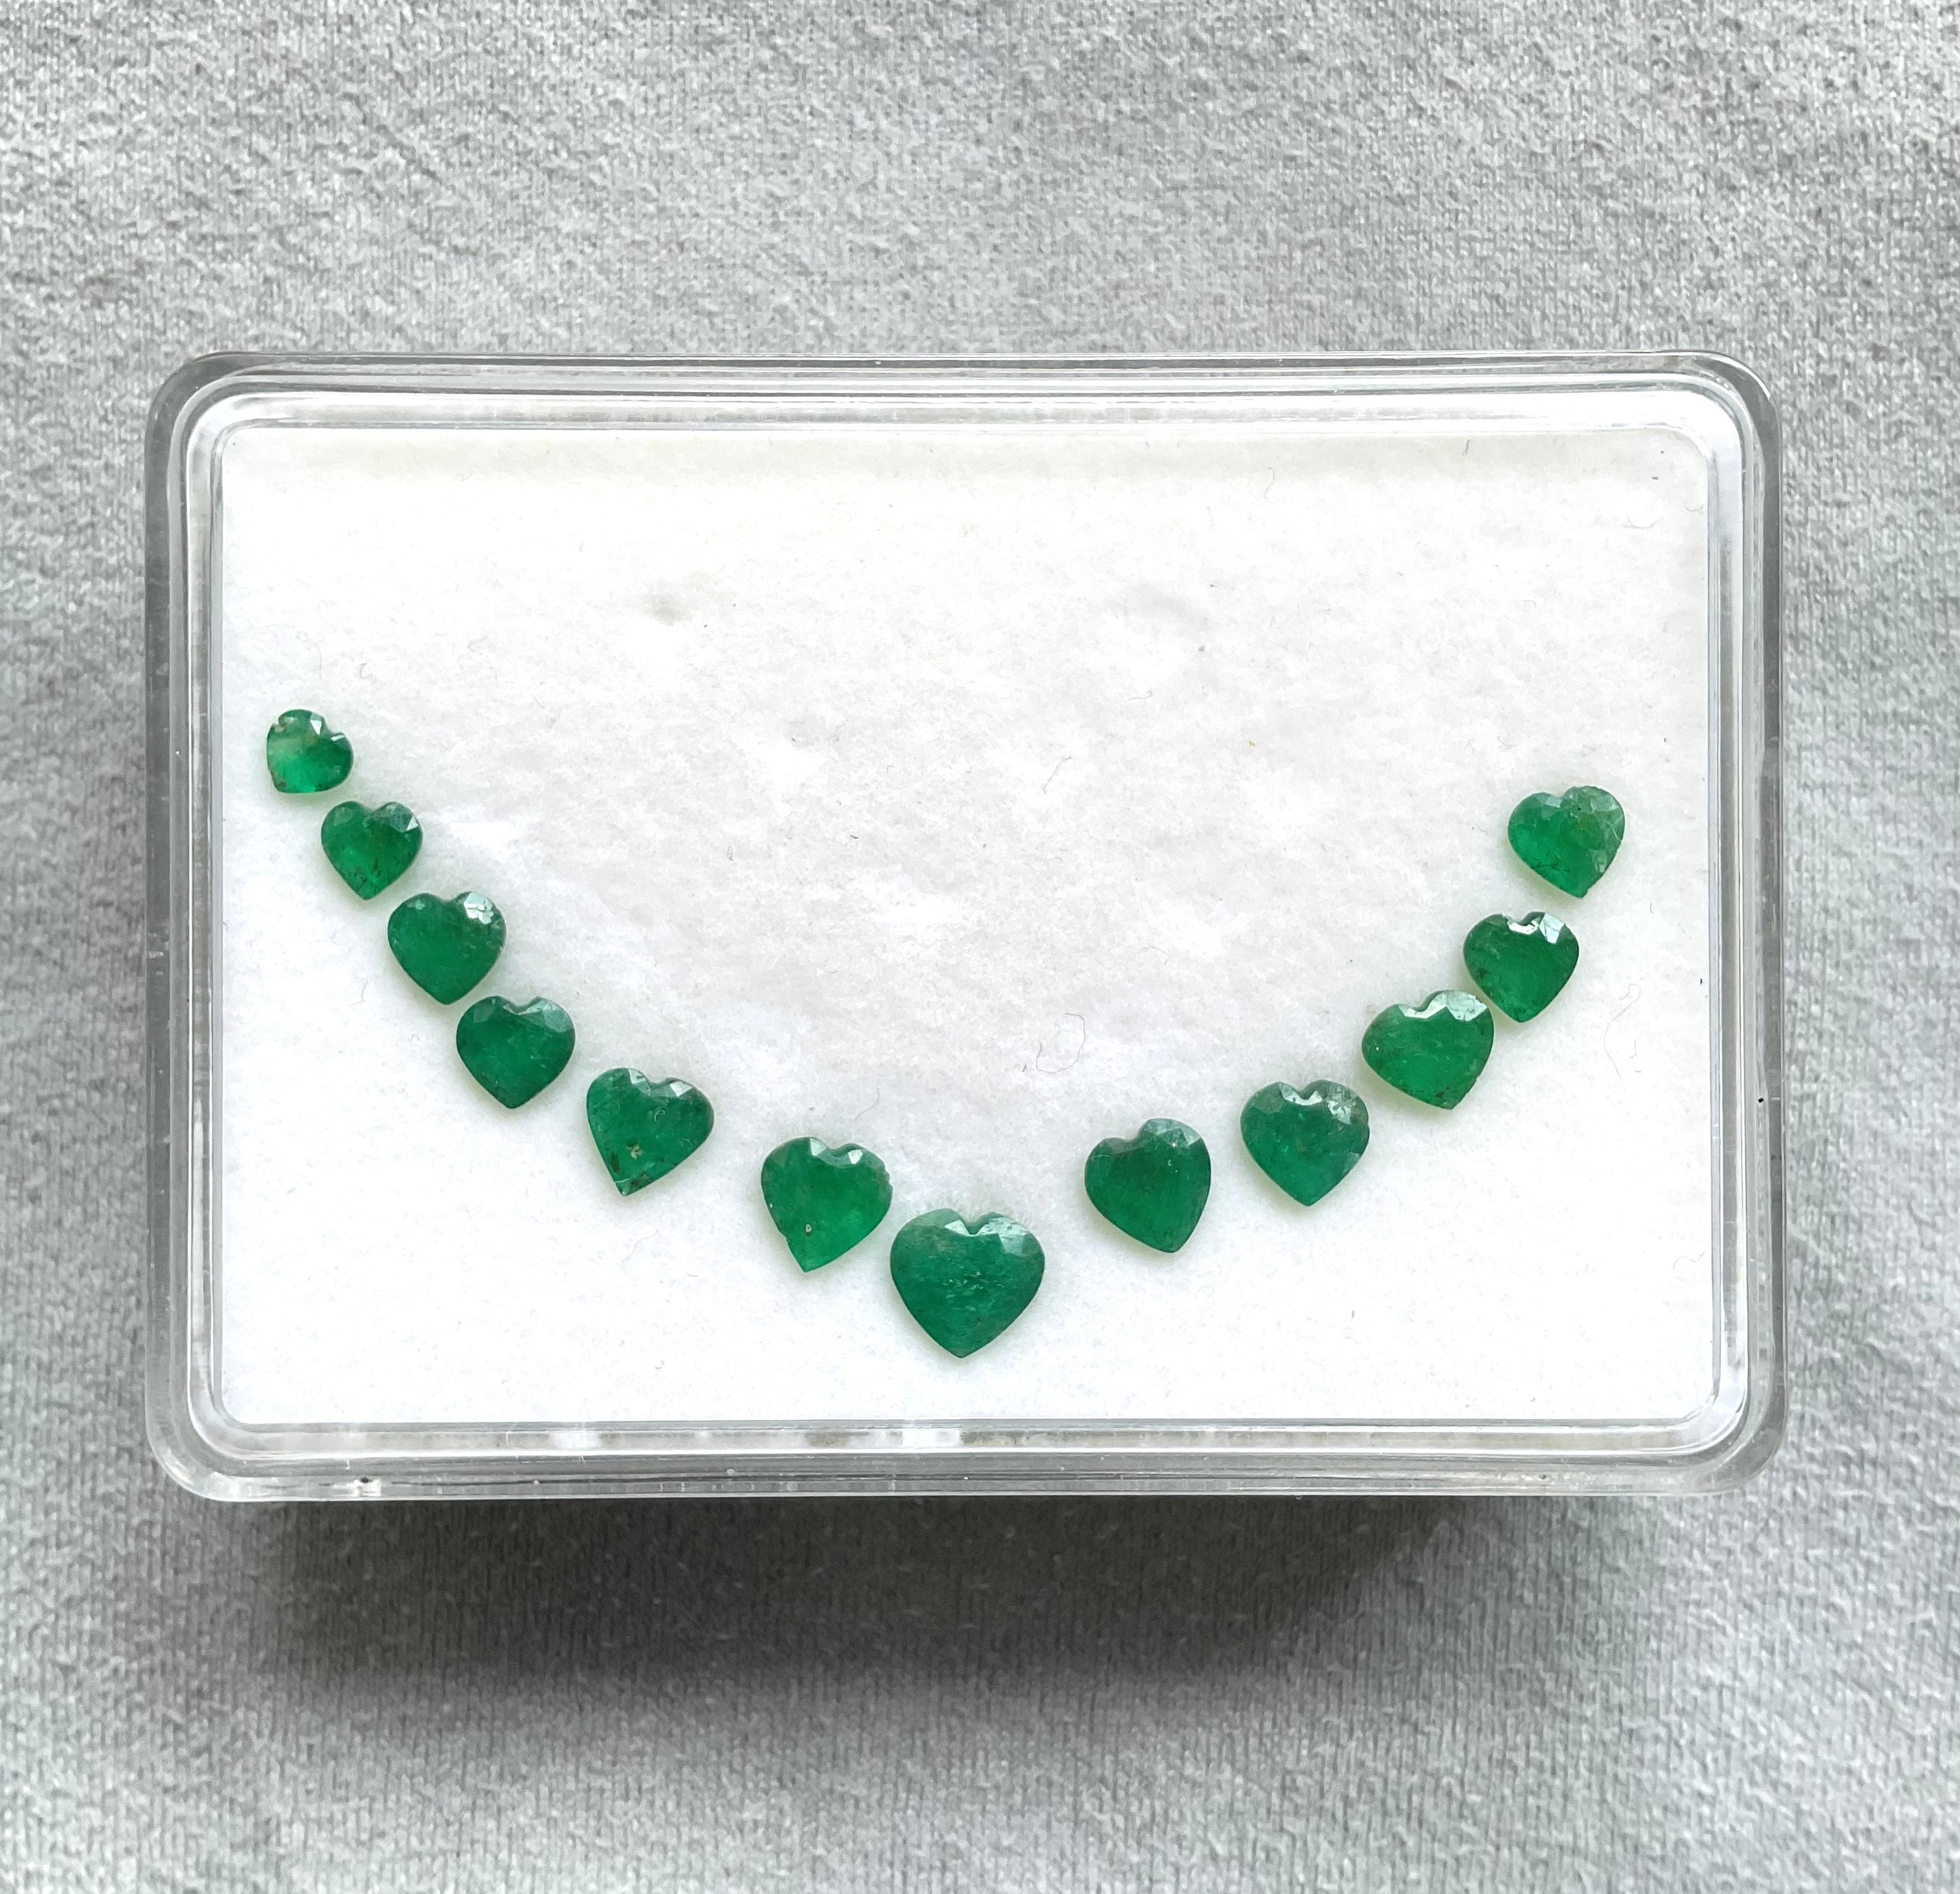 Gemstone - Emerald
Weight - 7.65 carats
Shape - Heart 
Size - Size - 5x4 To 7x7 MM 
Quantity - 12 Pieces